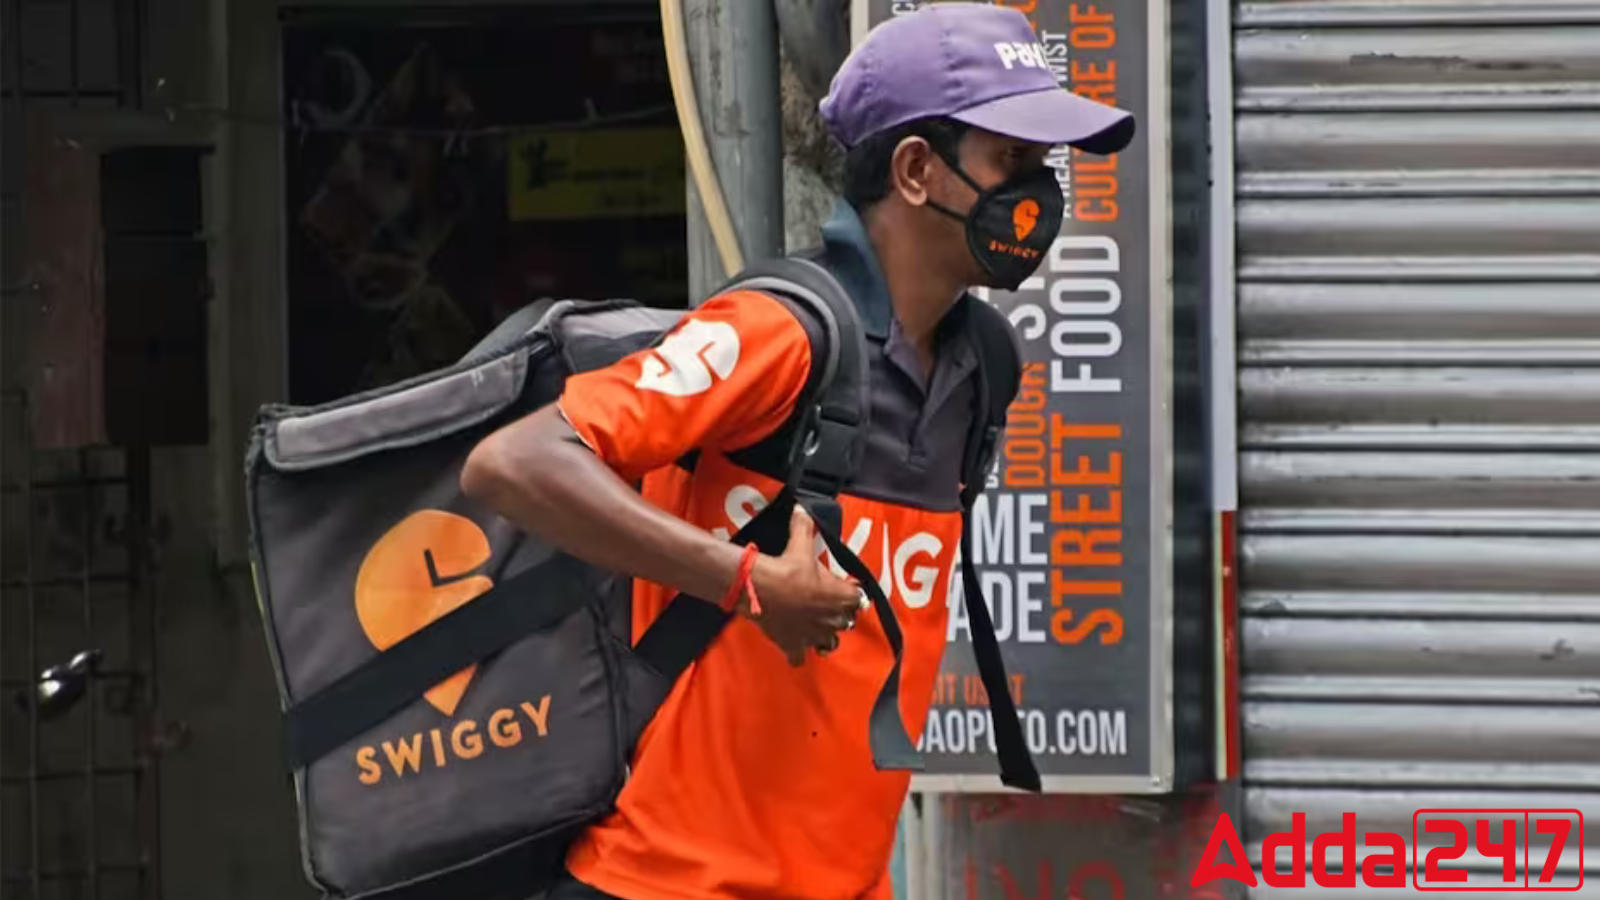 IRCTC Teams Up With Swiggy For Pre-Ordered Meal Delivery